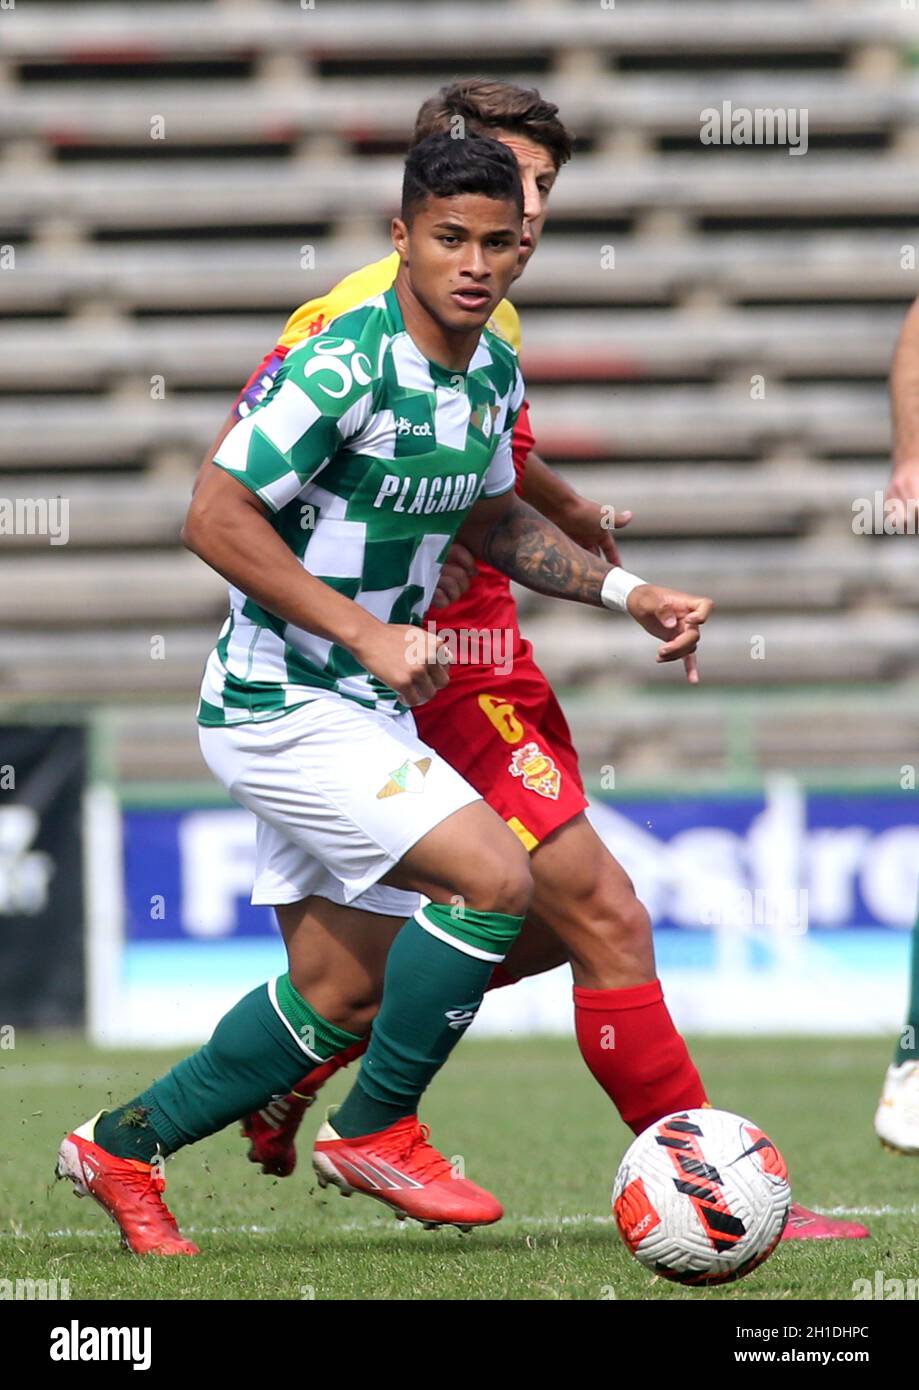 LAVRADIO, PORTUGAL - OCTOBER 16: Yan Matheus of Moreirense FC competes for the ball with Goncalo Silva of Oriental Dragon FC ,during the Portuguese Cup match between Oriental Dragon FC and Moreirense FC at Estadio Alfredo Da Silva on October 16, 2021 in Lavradio, Portugal. (MB Media) Stock Photo